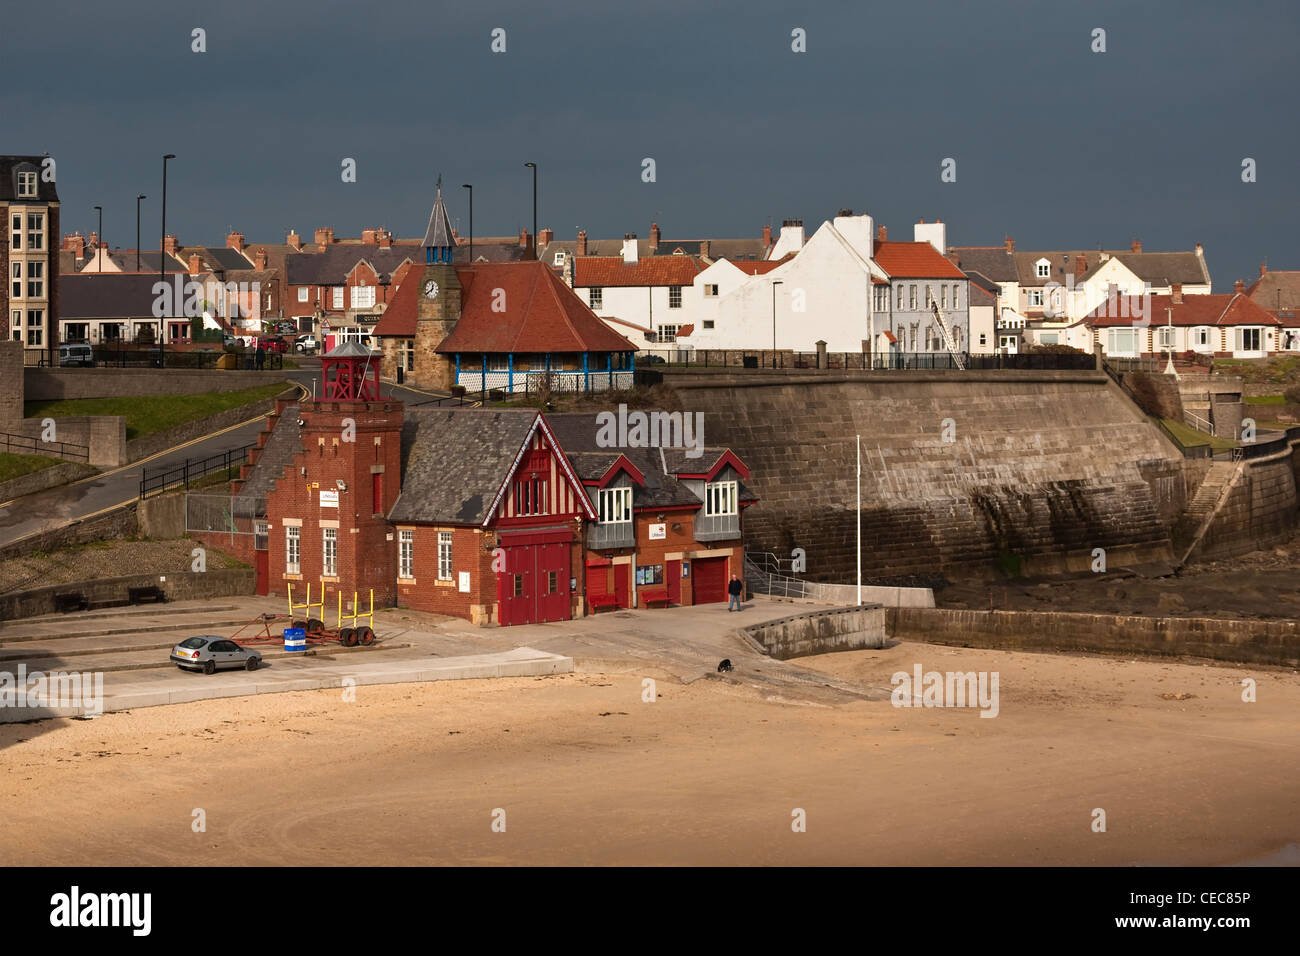 Cullercoats harbor with a stormy sky, Tynemouth. England uk. Stock Photo